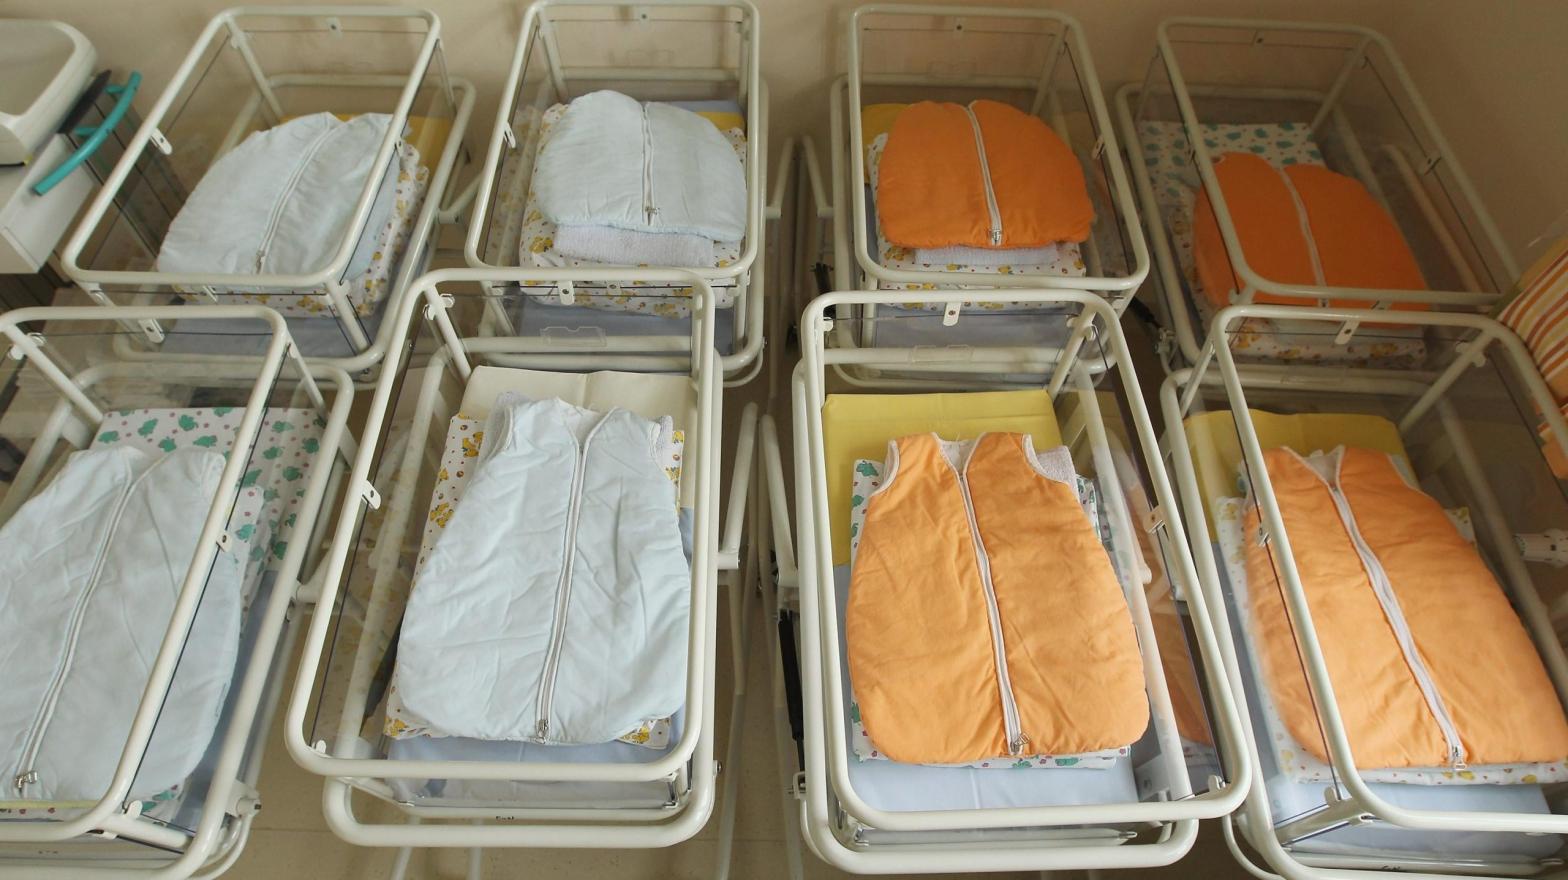 Empty newborn beds in the maternity ward of a hospital. (Photo: Sean Gallup, Getty Images)